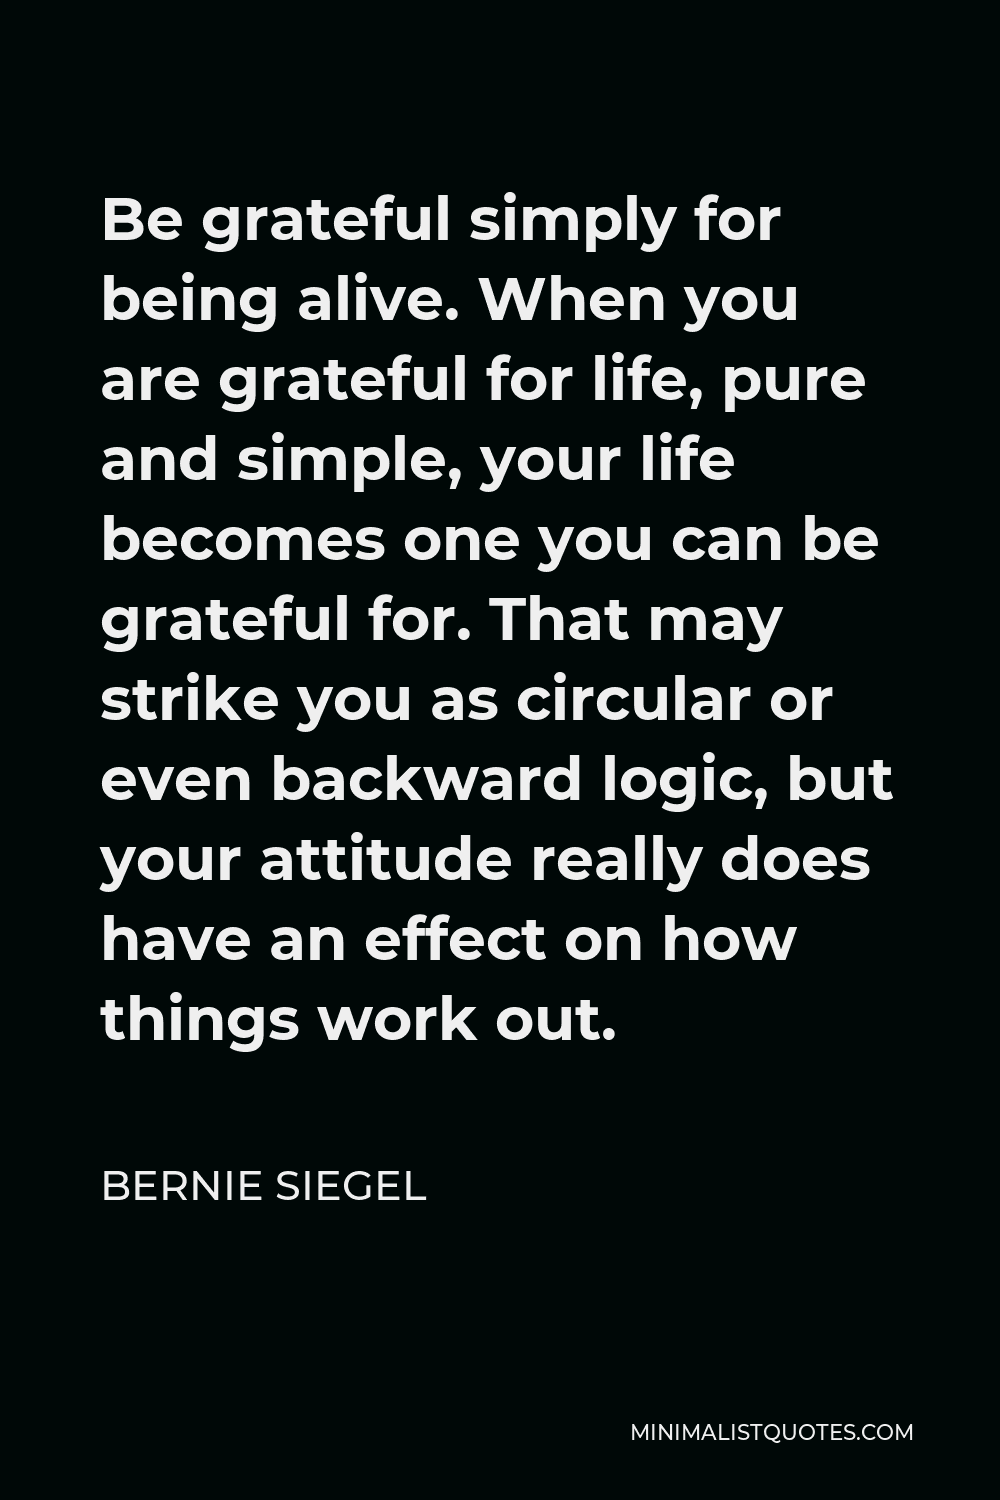 Bernie Siegel Quote - Be grateful simply for being alive. When you are grateful for life, pure and simple, your life becomes one you can be grateful for. That may strike you as circular or even backward logic, but your attitude really does have an effect on how things work out.